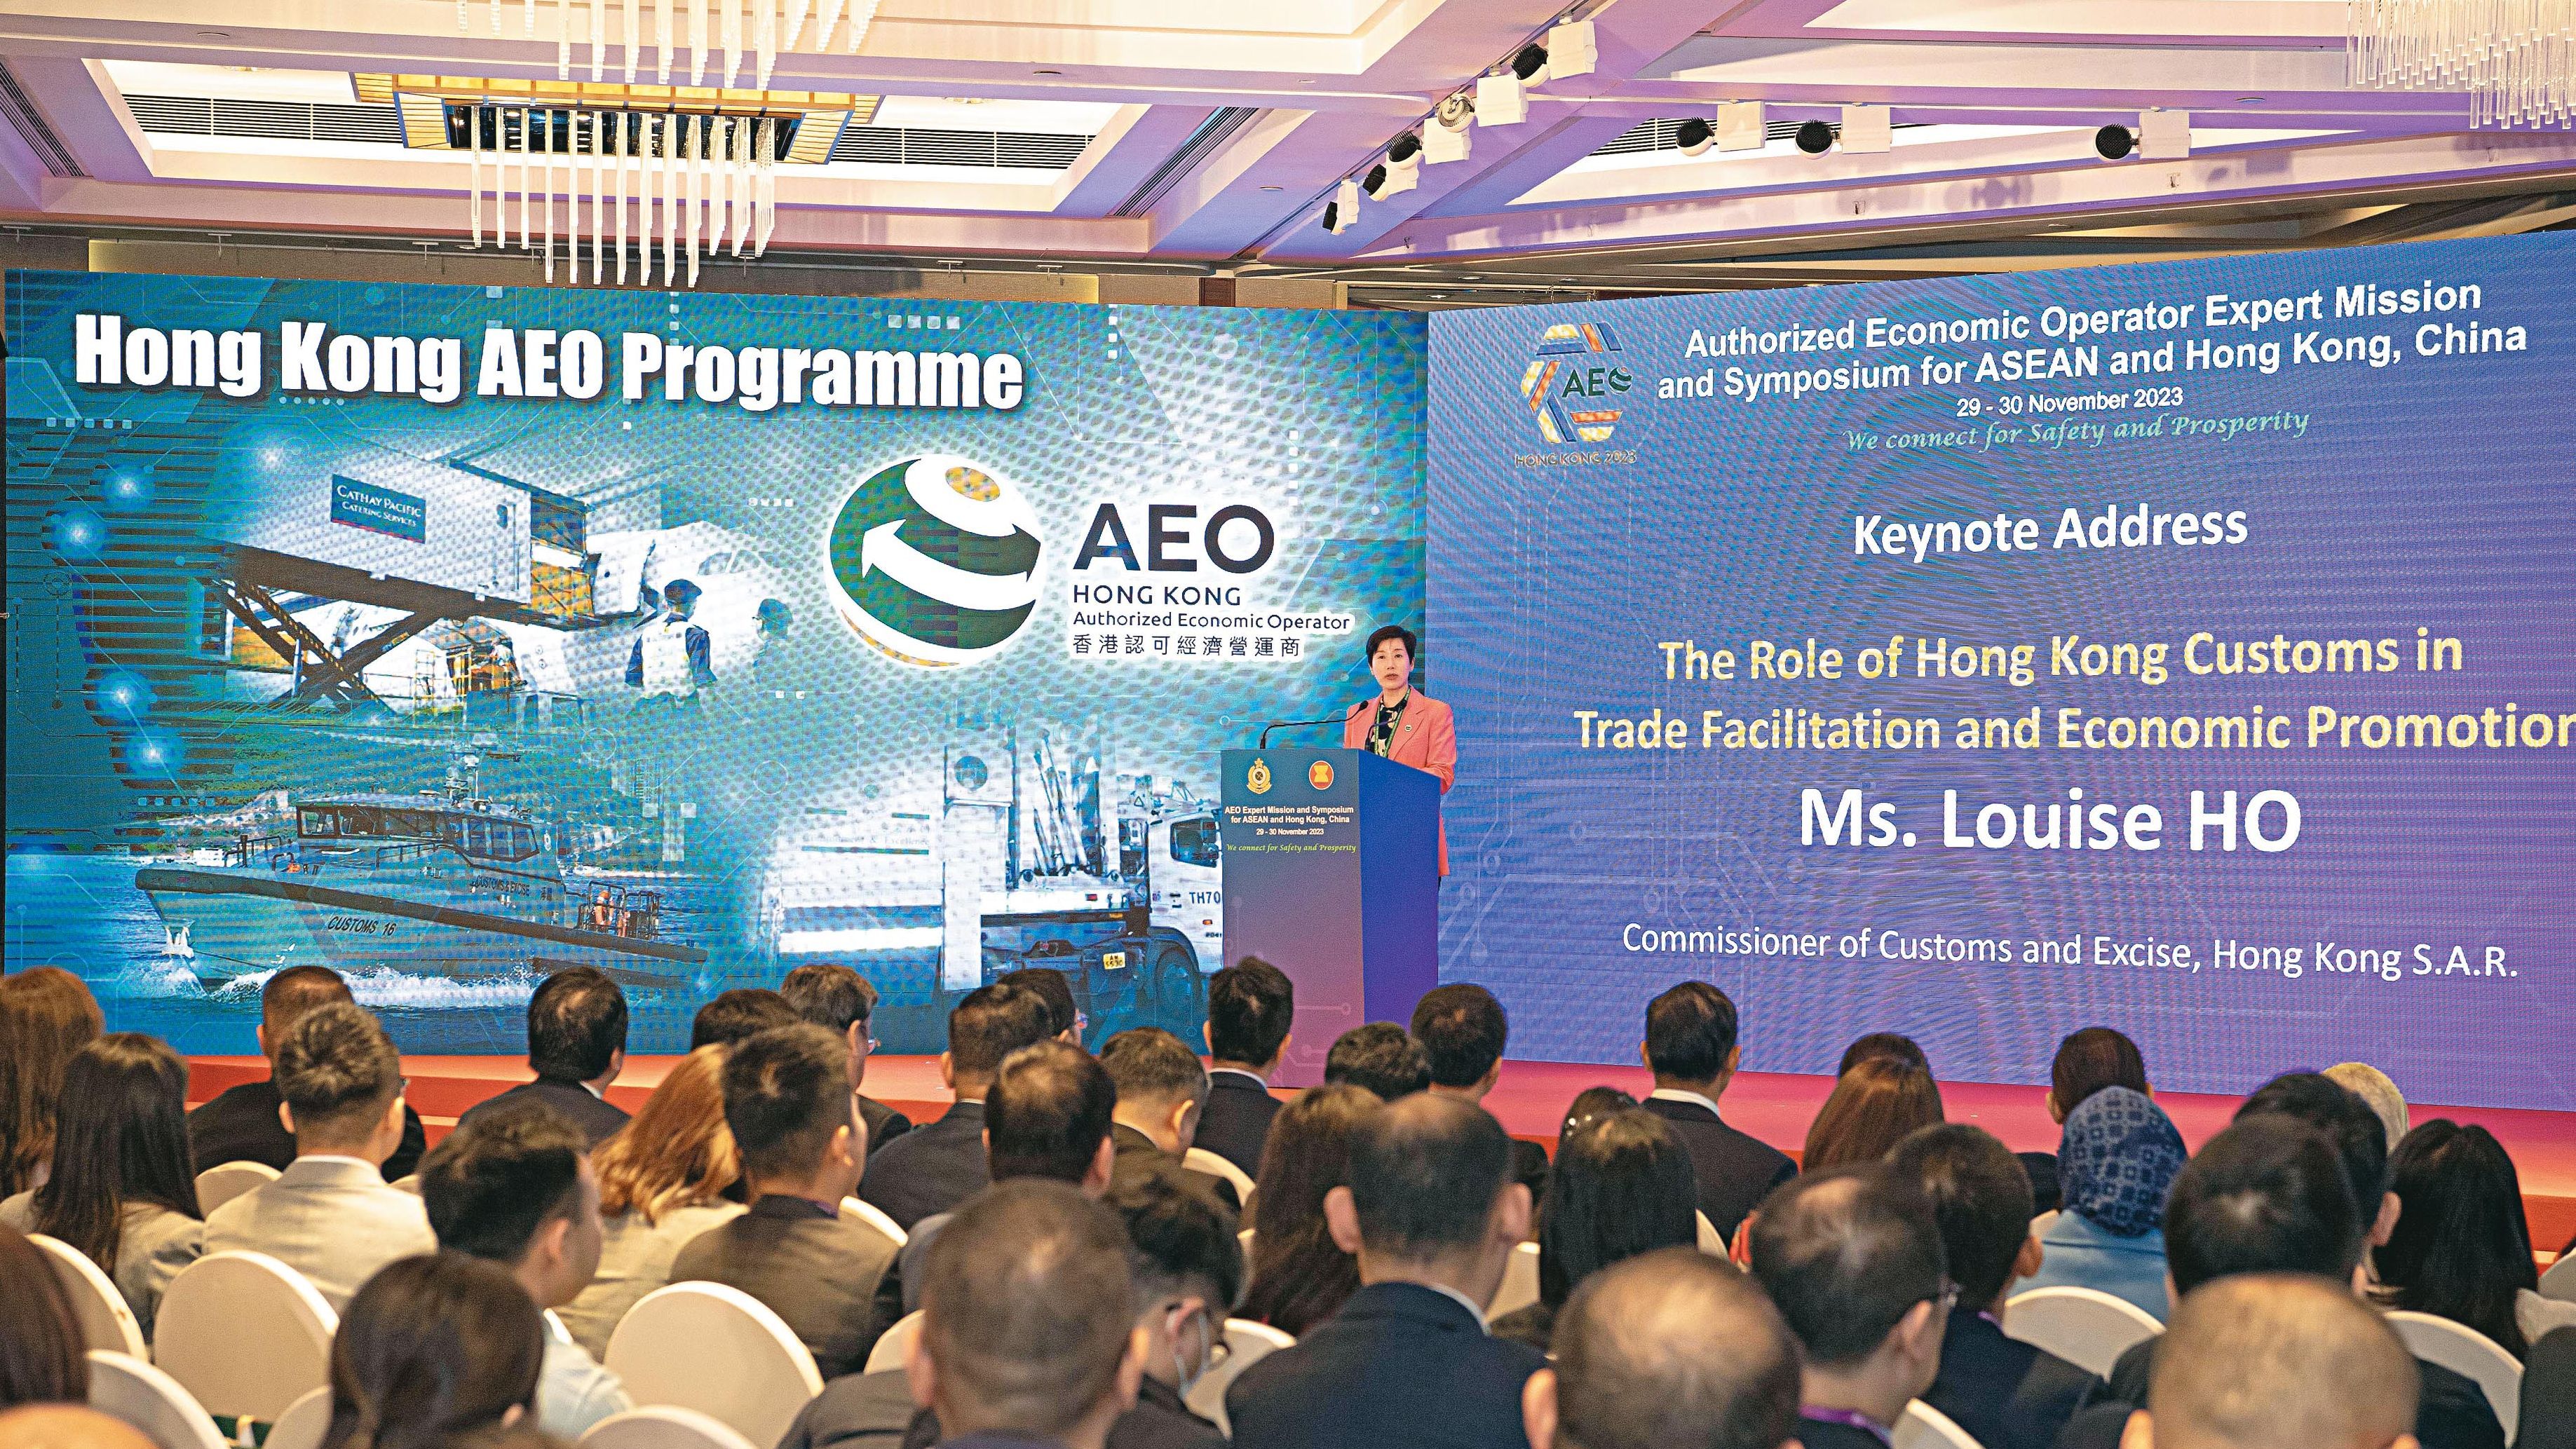 Hong Kong Customs organised “AEO Expert Mission and Symposium” in collaboration with ASEAN, connected for Safety and Prosperity